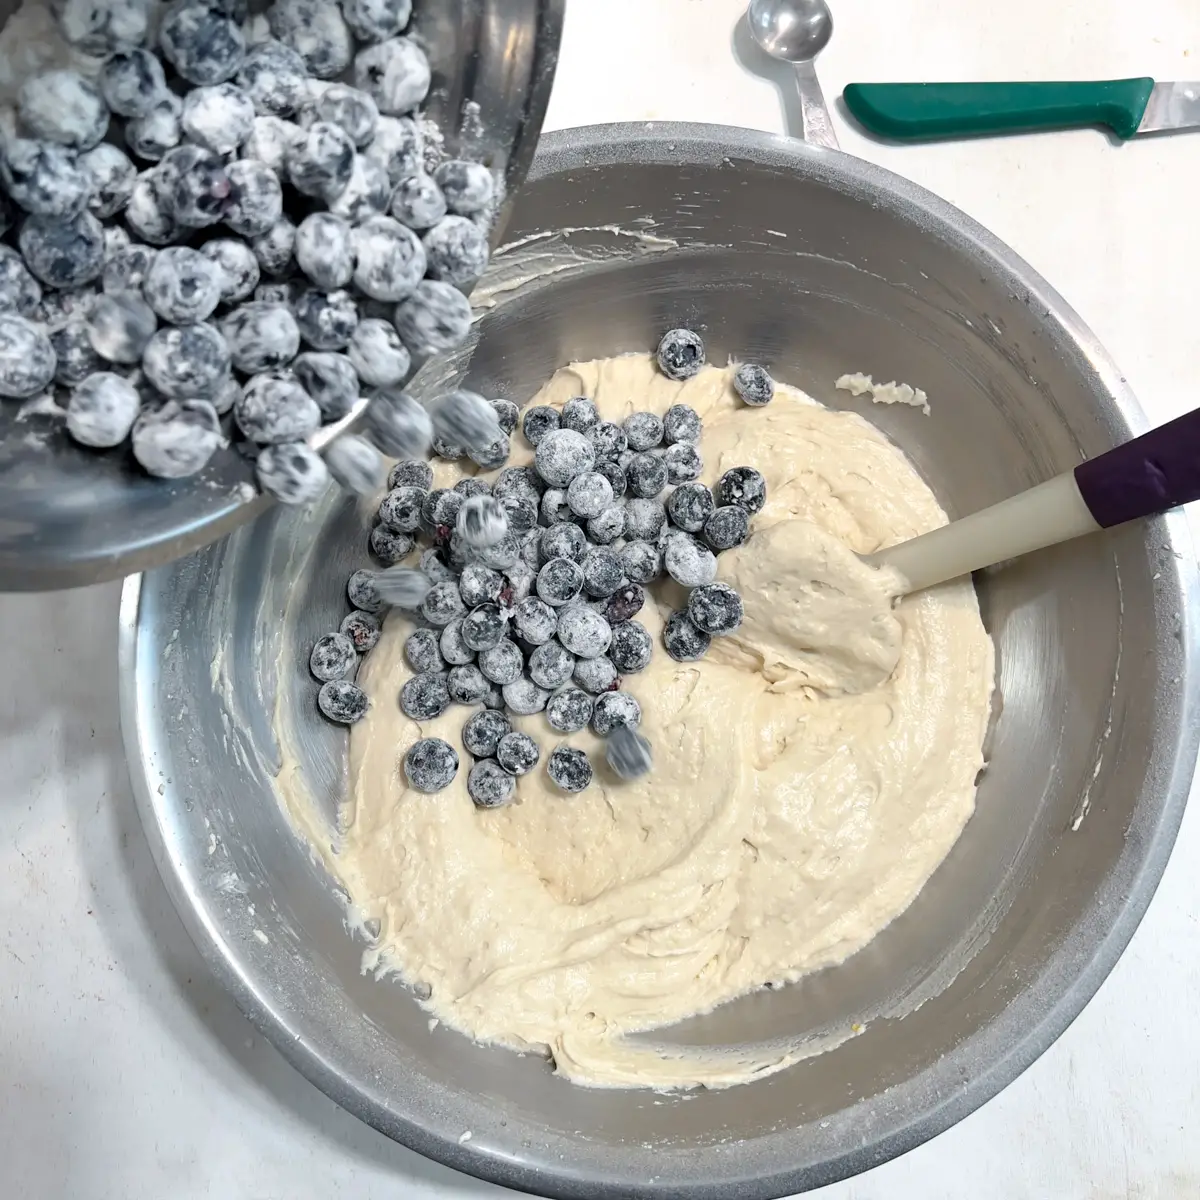 Flour coated blueberries being stirred into the cake batter.